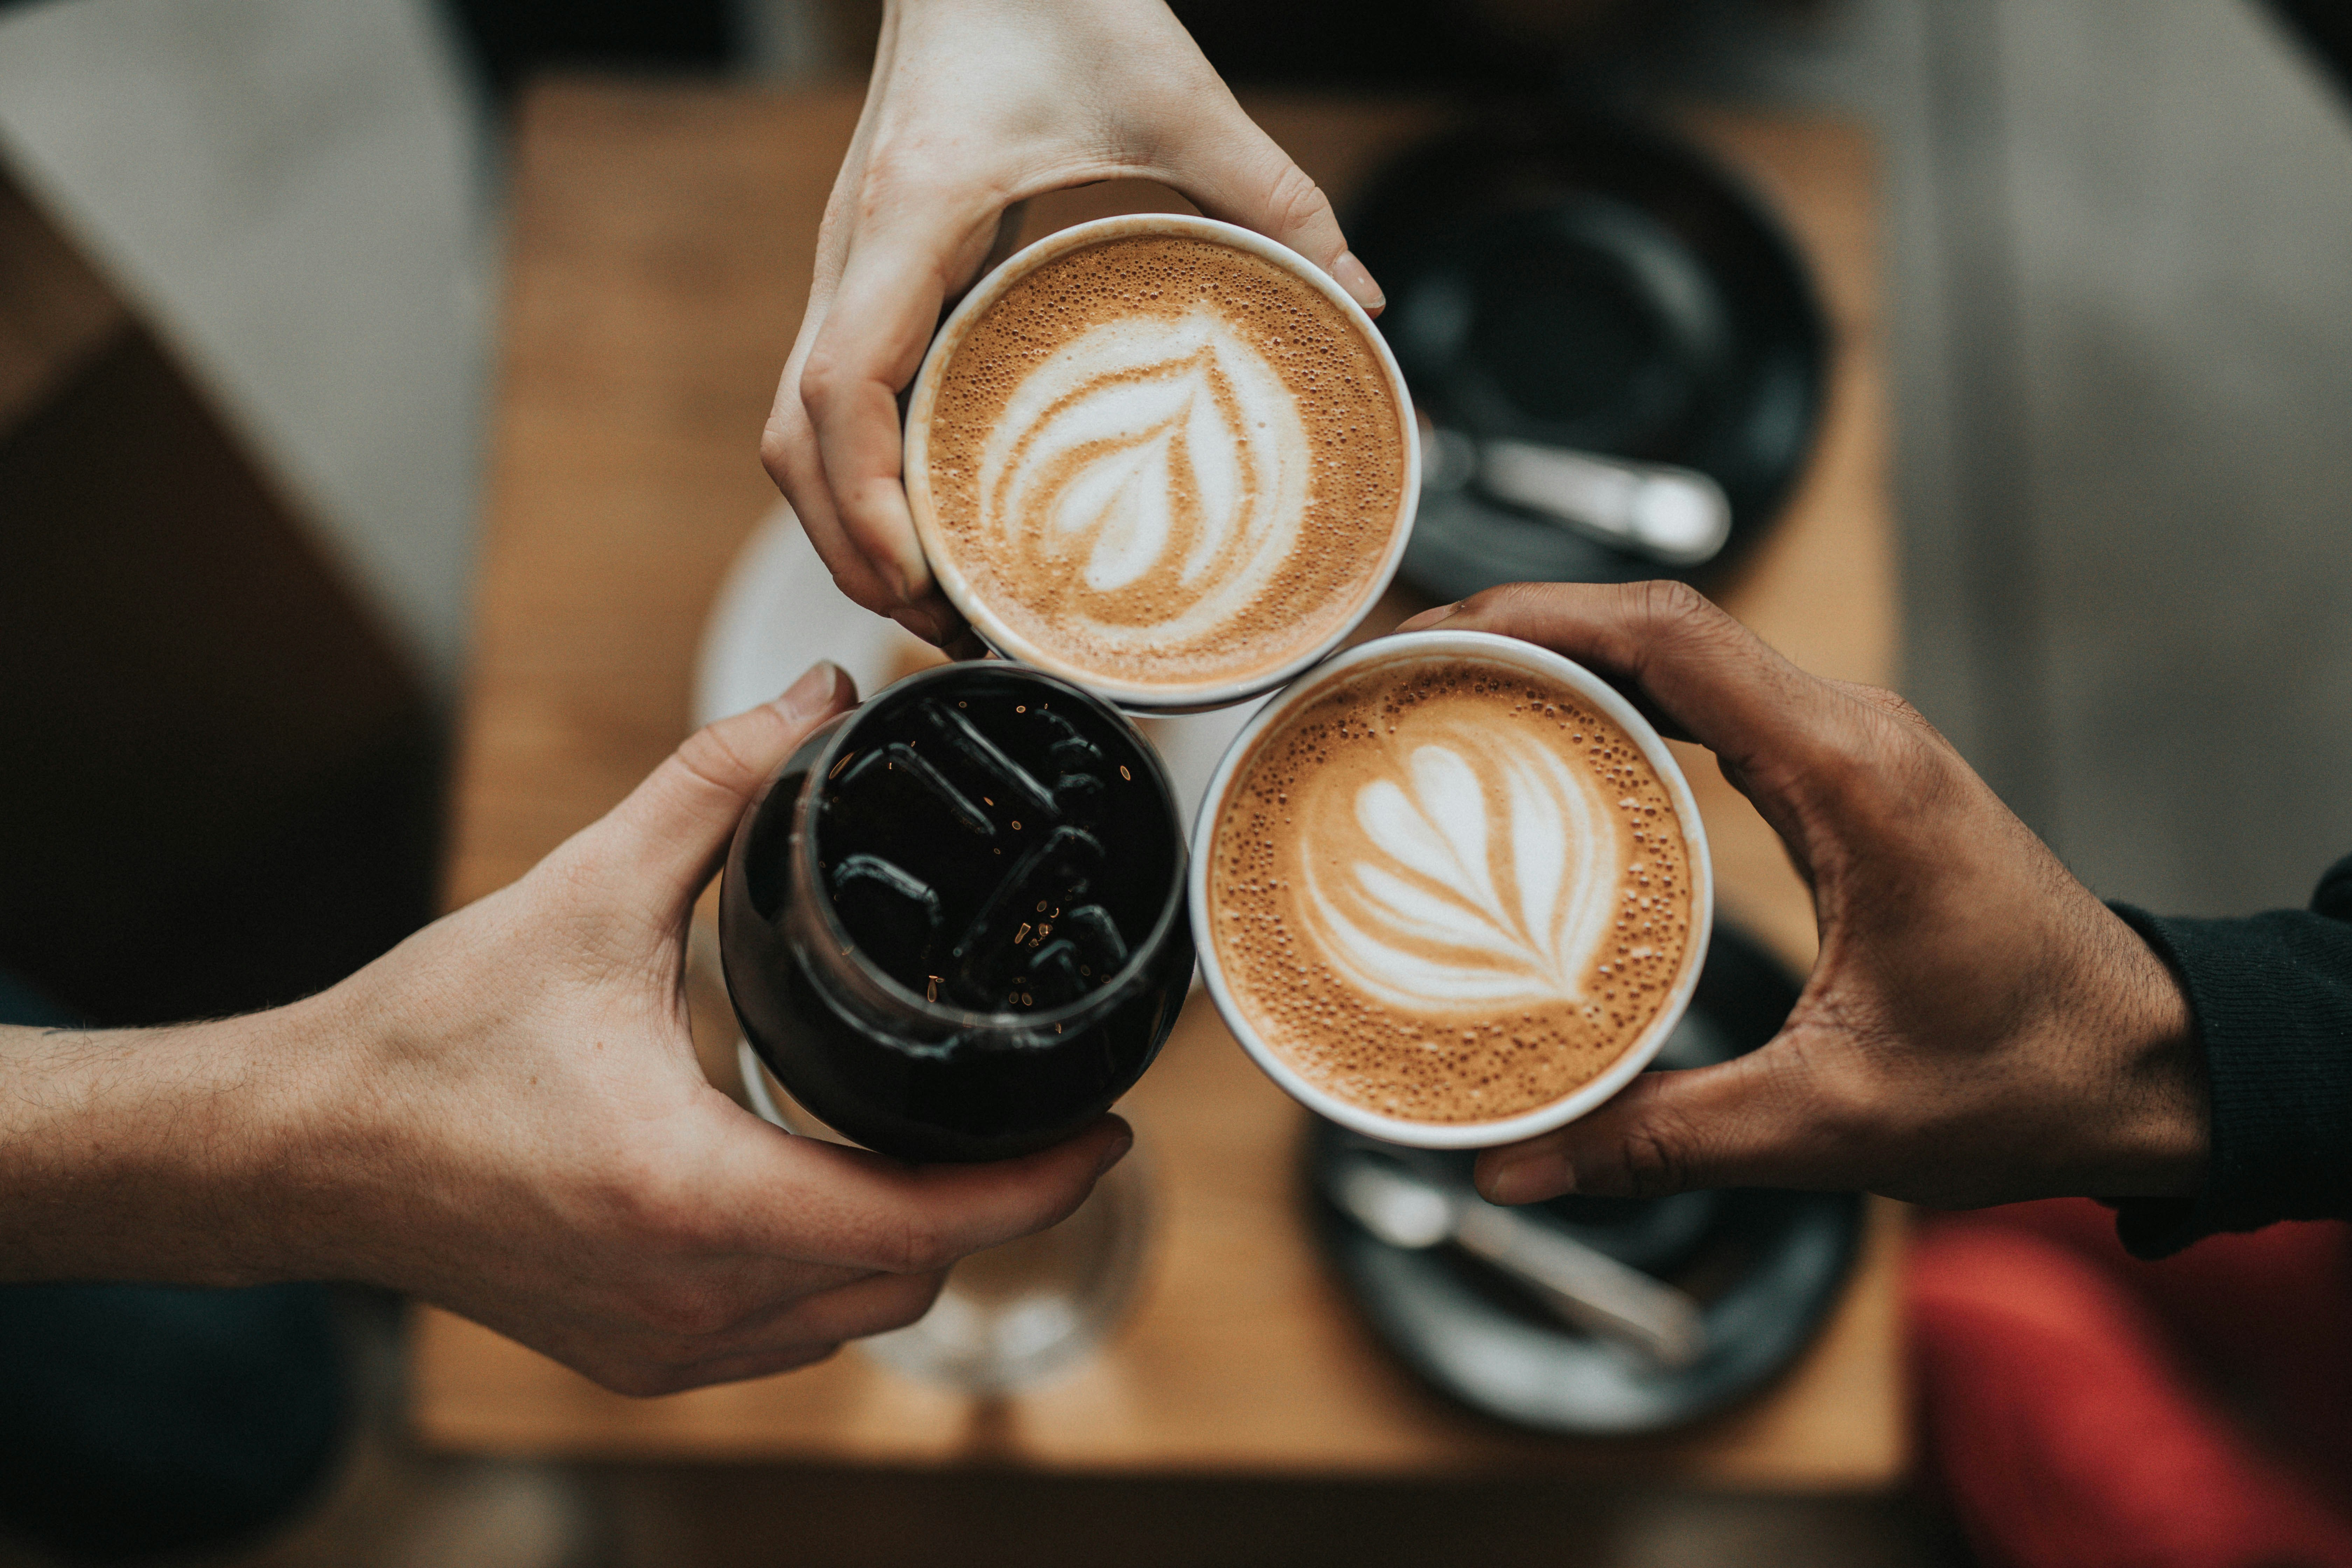 Discover the perfect spot to unwind and relax in the heart of White Rock at White Rock Coffee. From cozy ambience to delicious coffee options, this blog post outlines everything you need to know about this popular coffee shop.